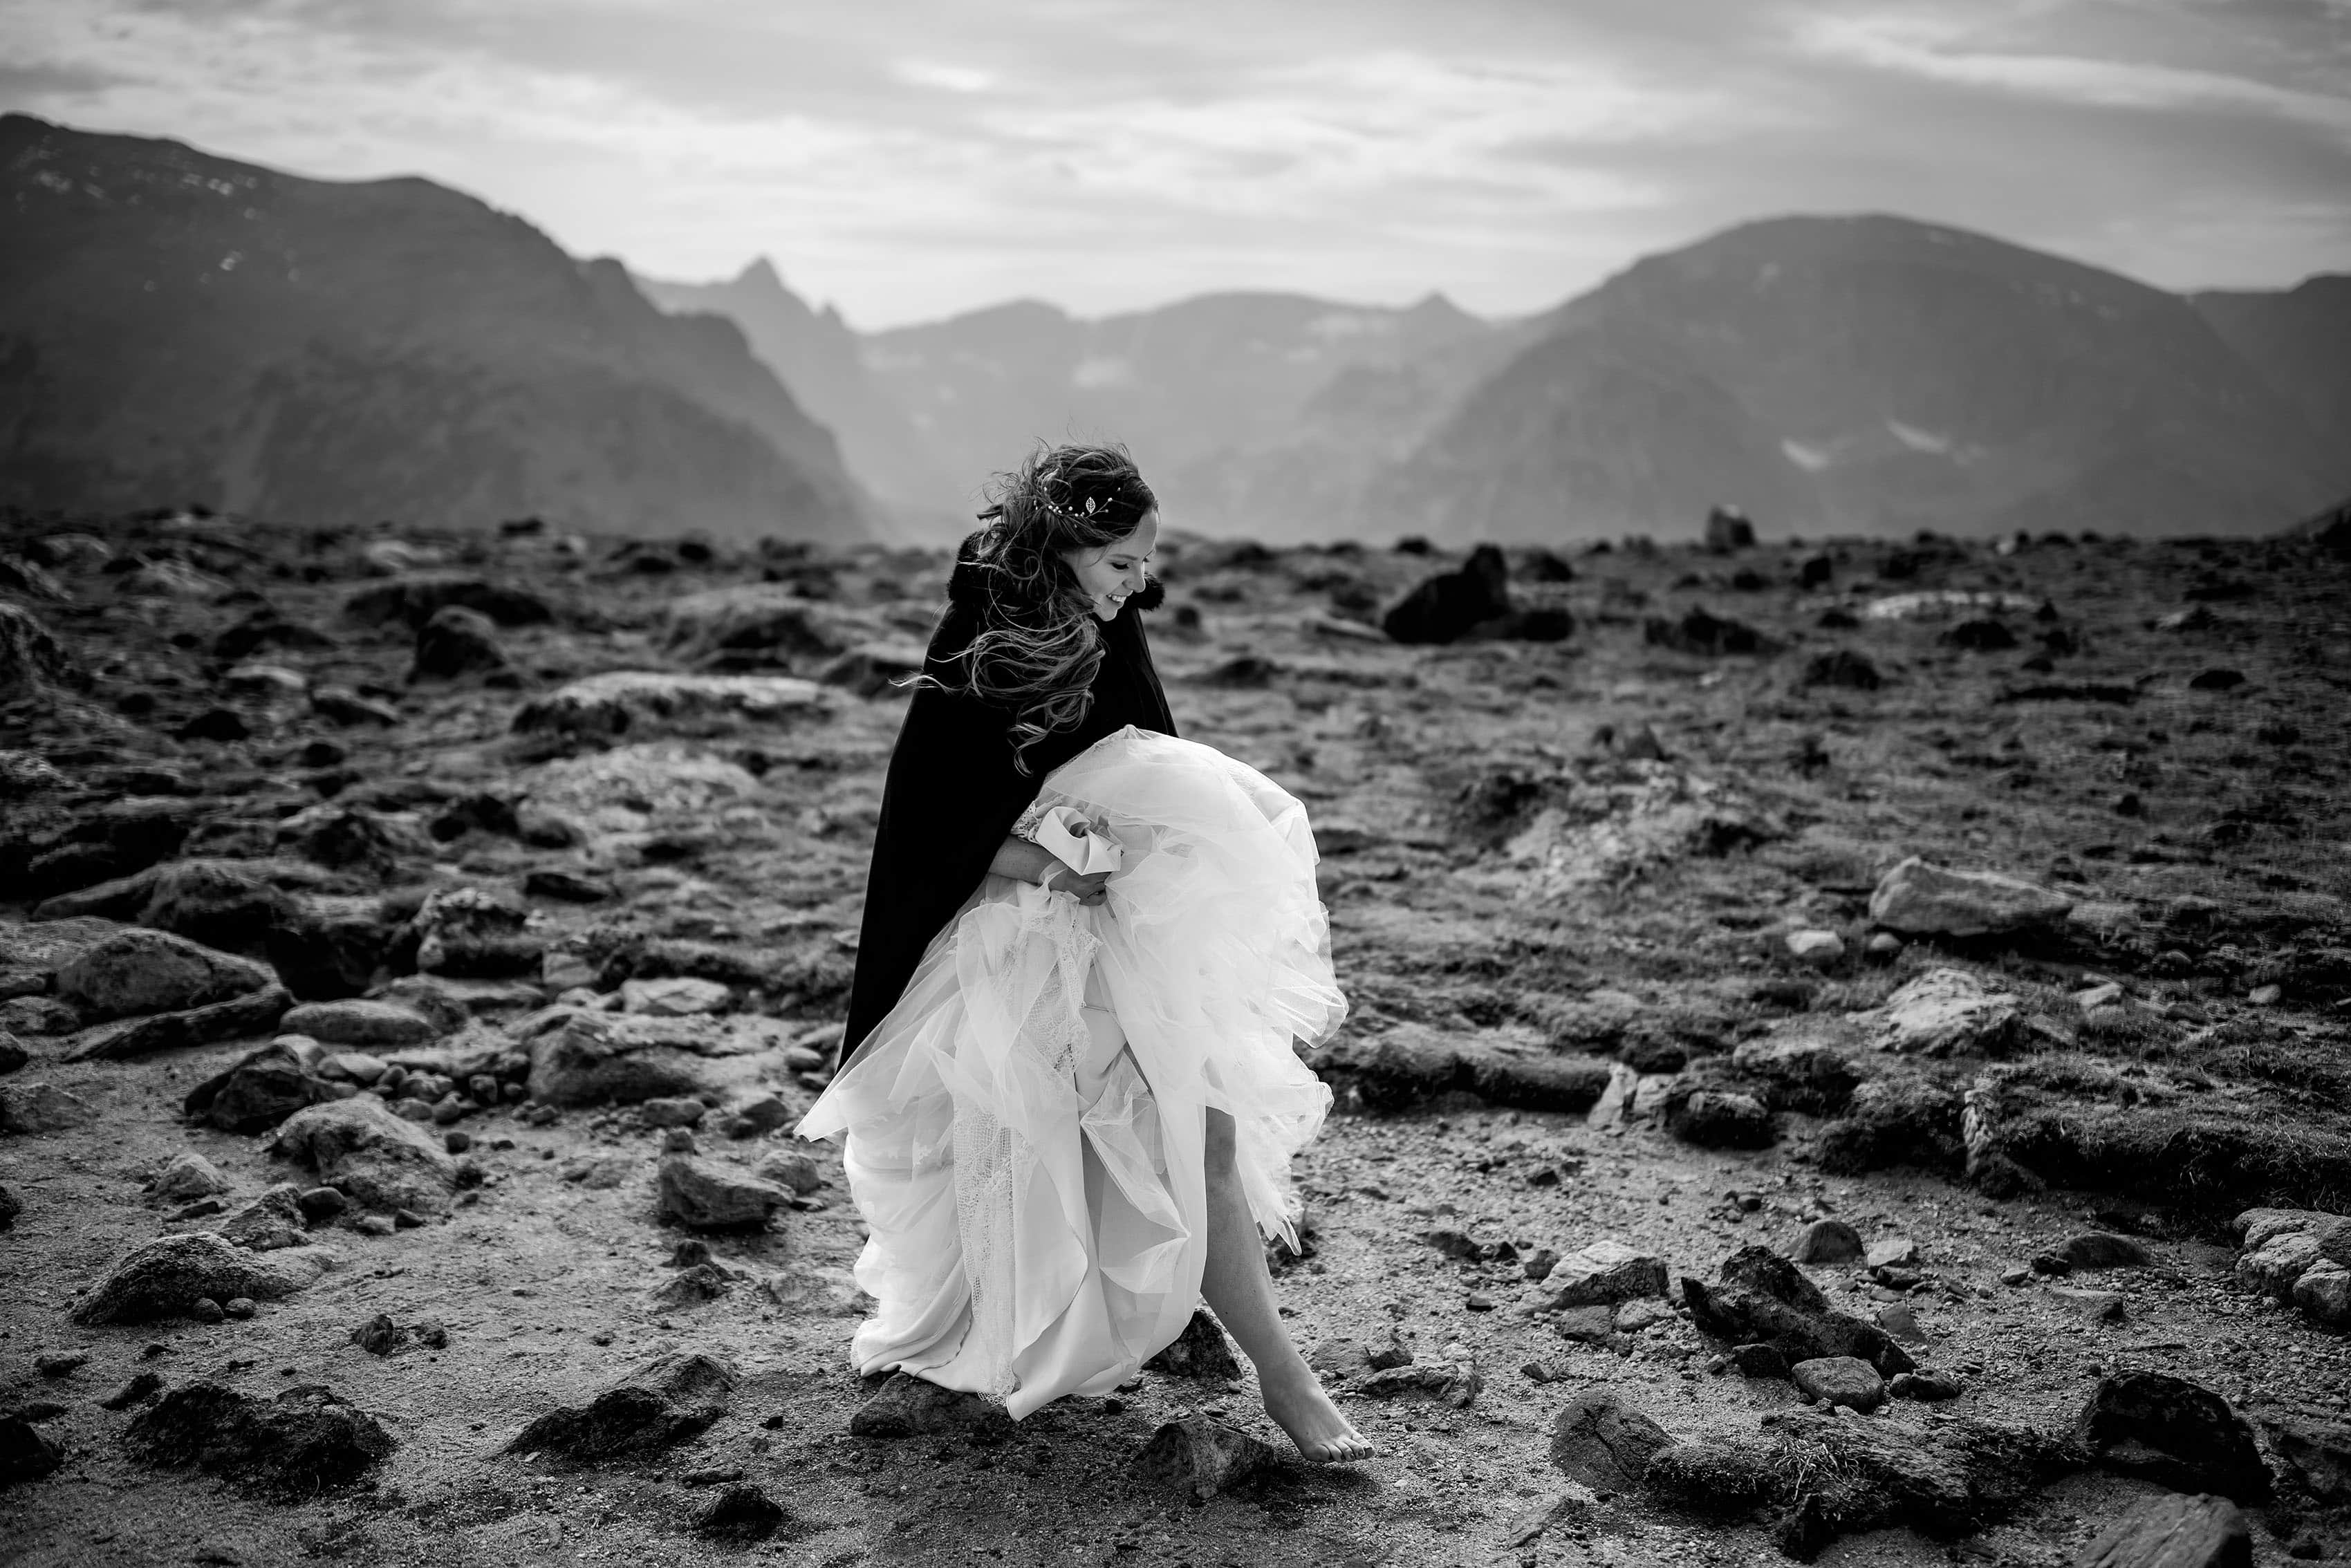 A bride walks barefoot in Rocky Mountain National Park